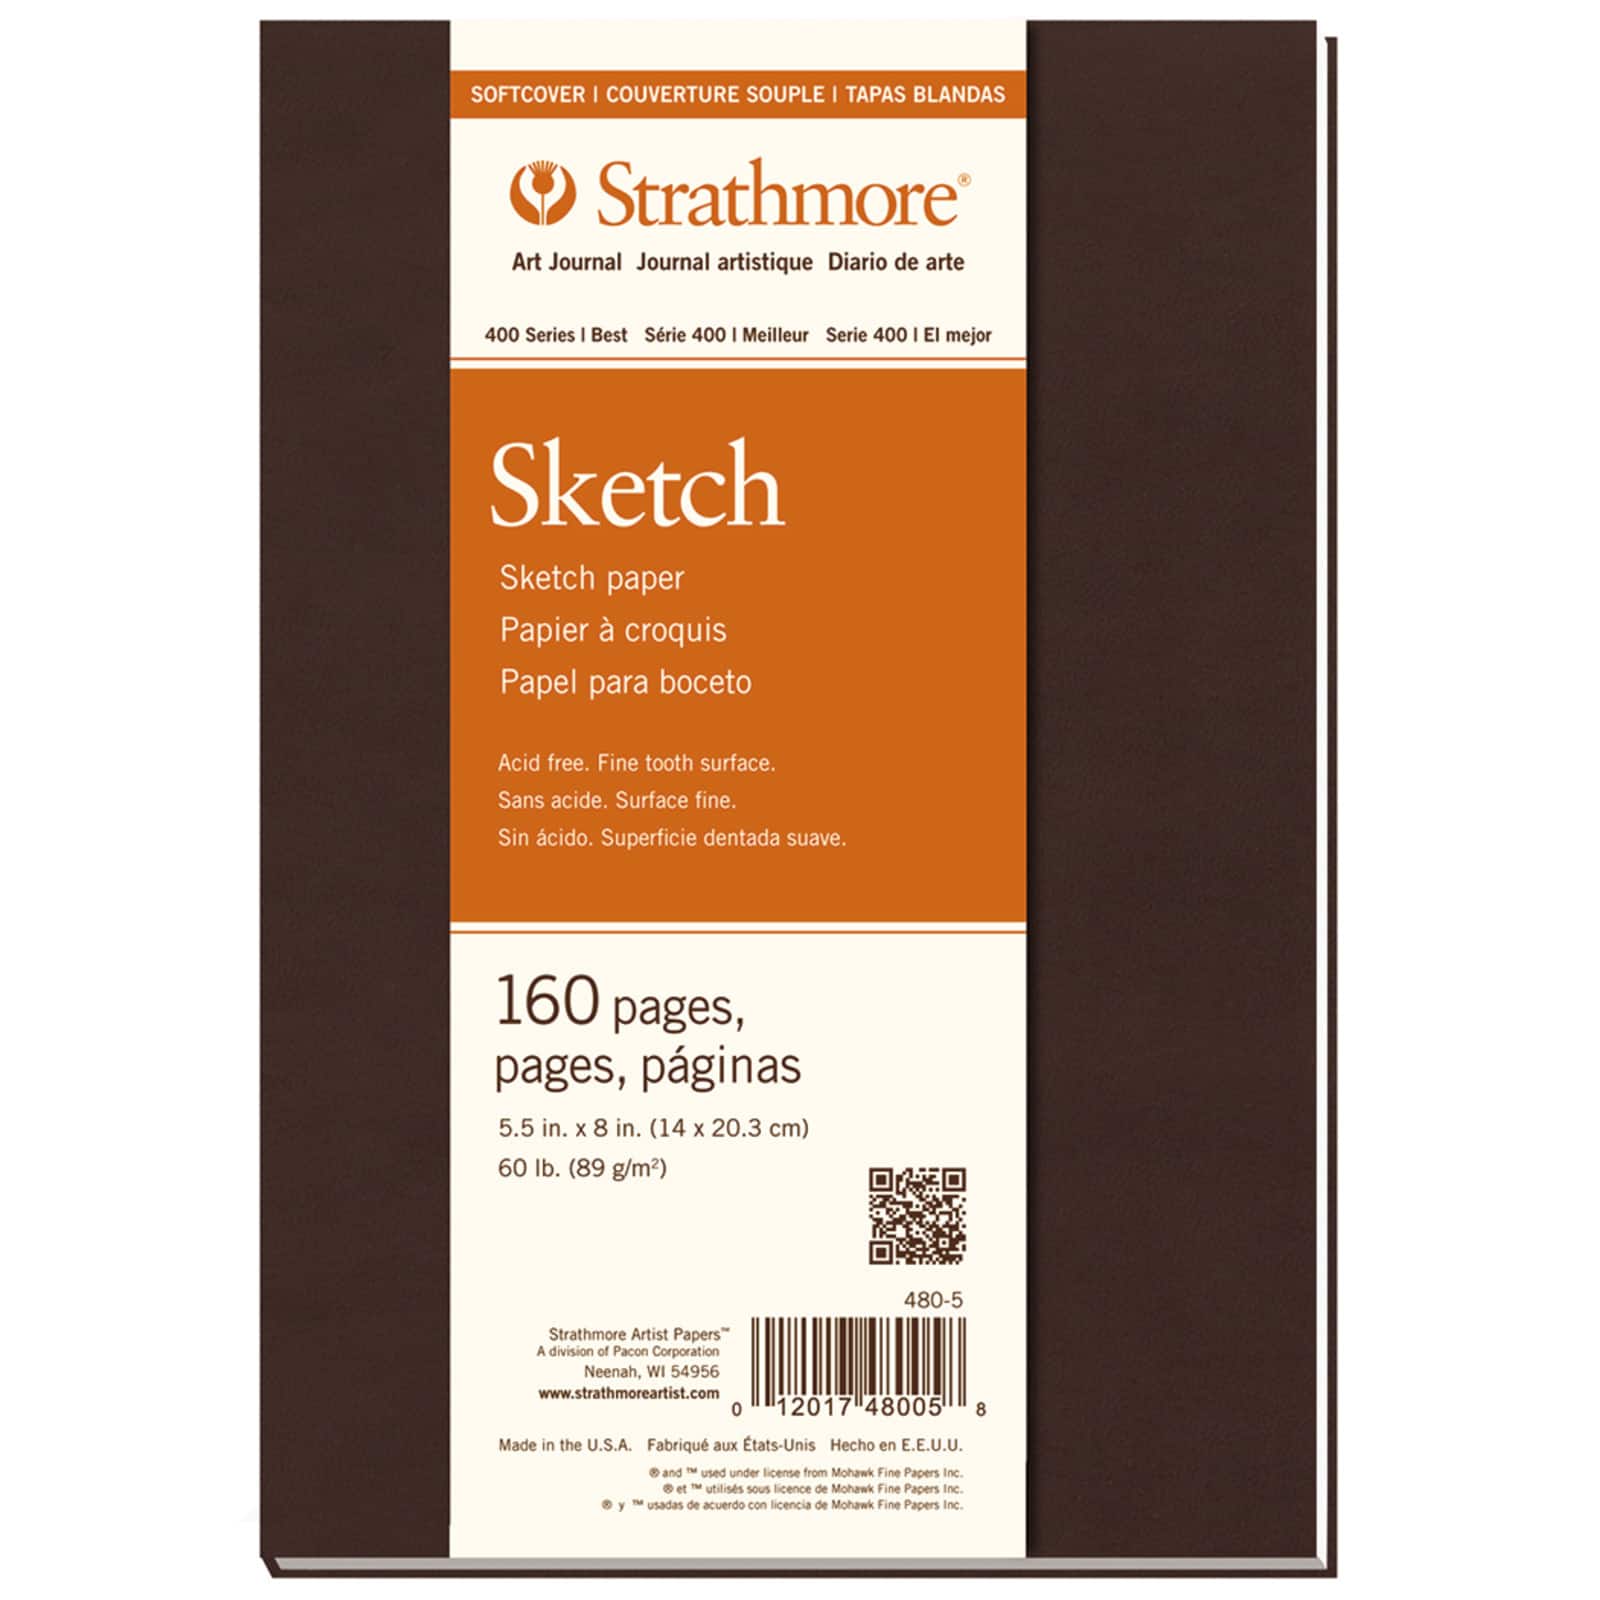 Softcover Art Journals - Strathmore Artist Papers